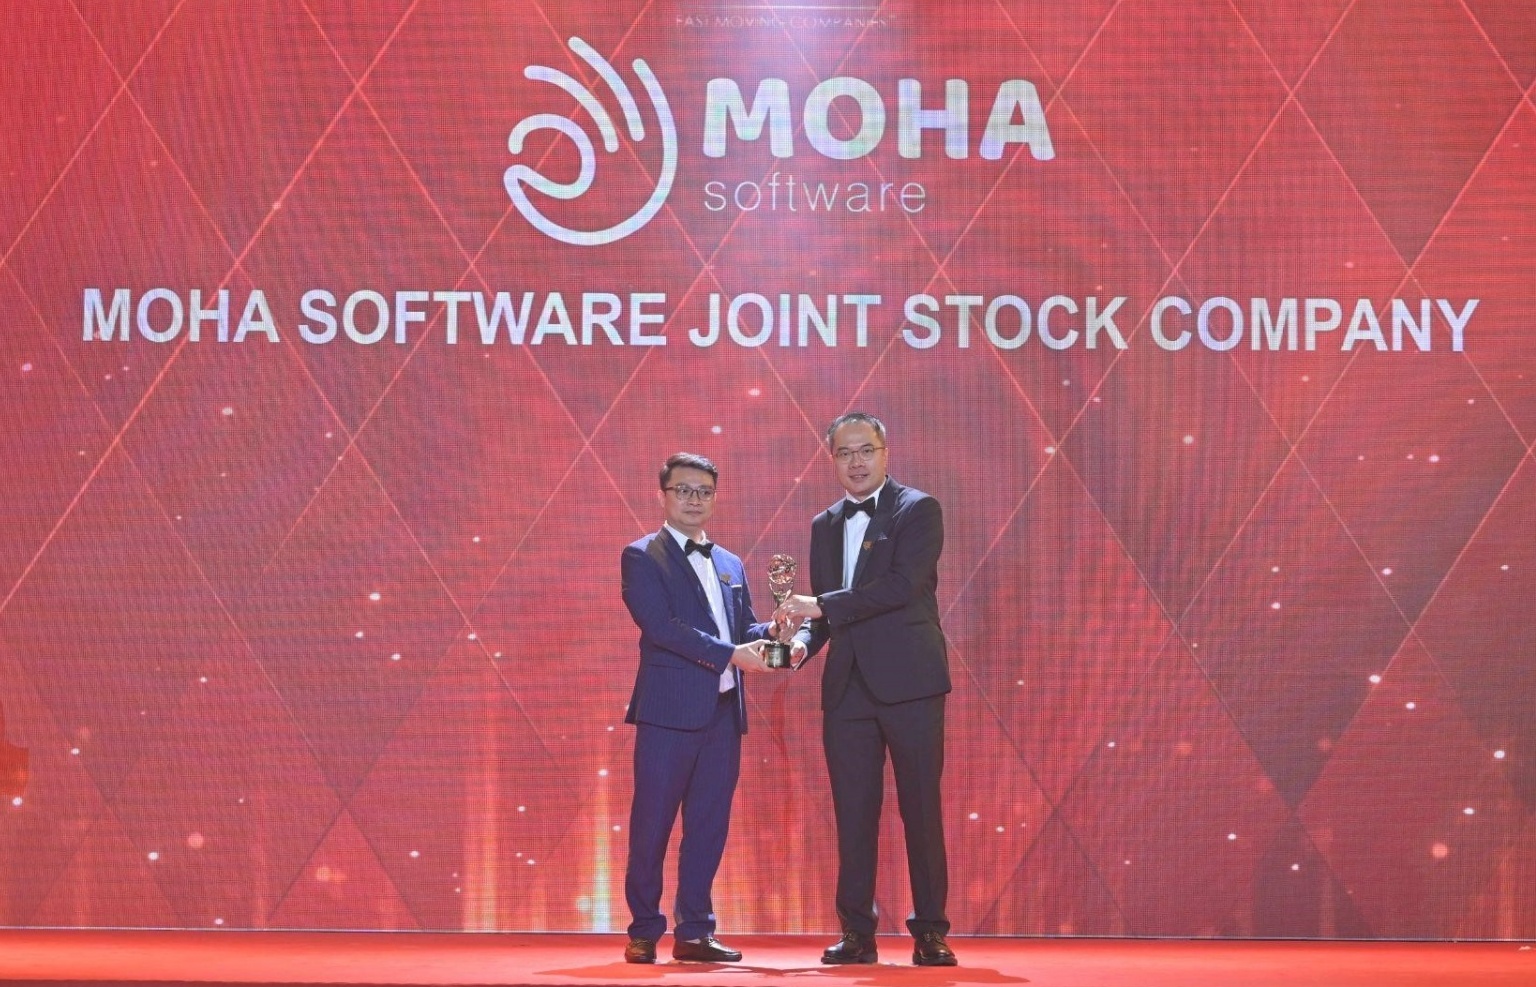 MOHA Software becomes partner of credibility, dedication, and ambition